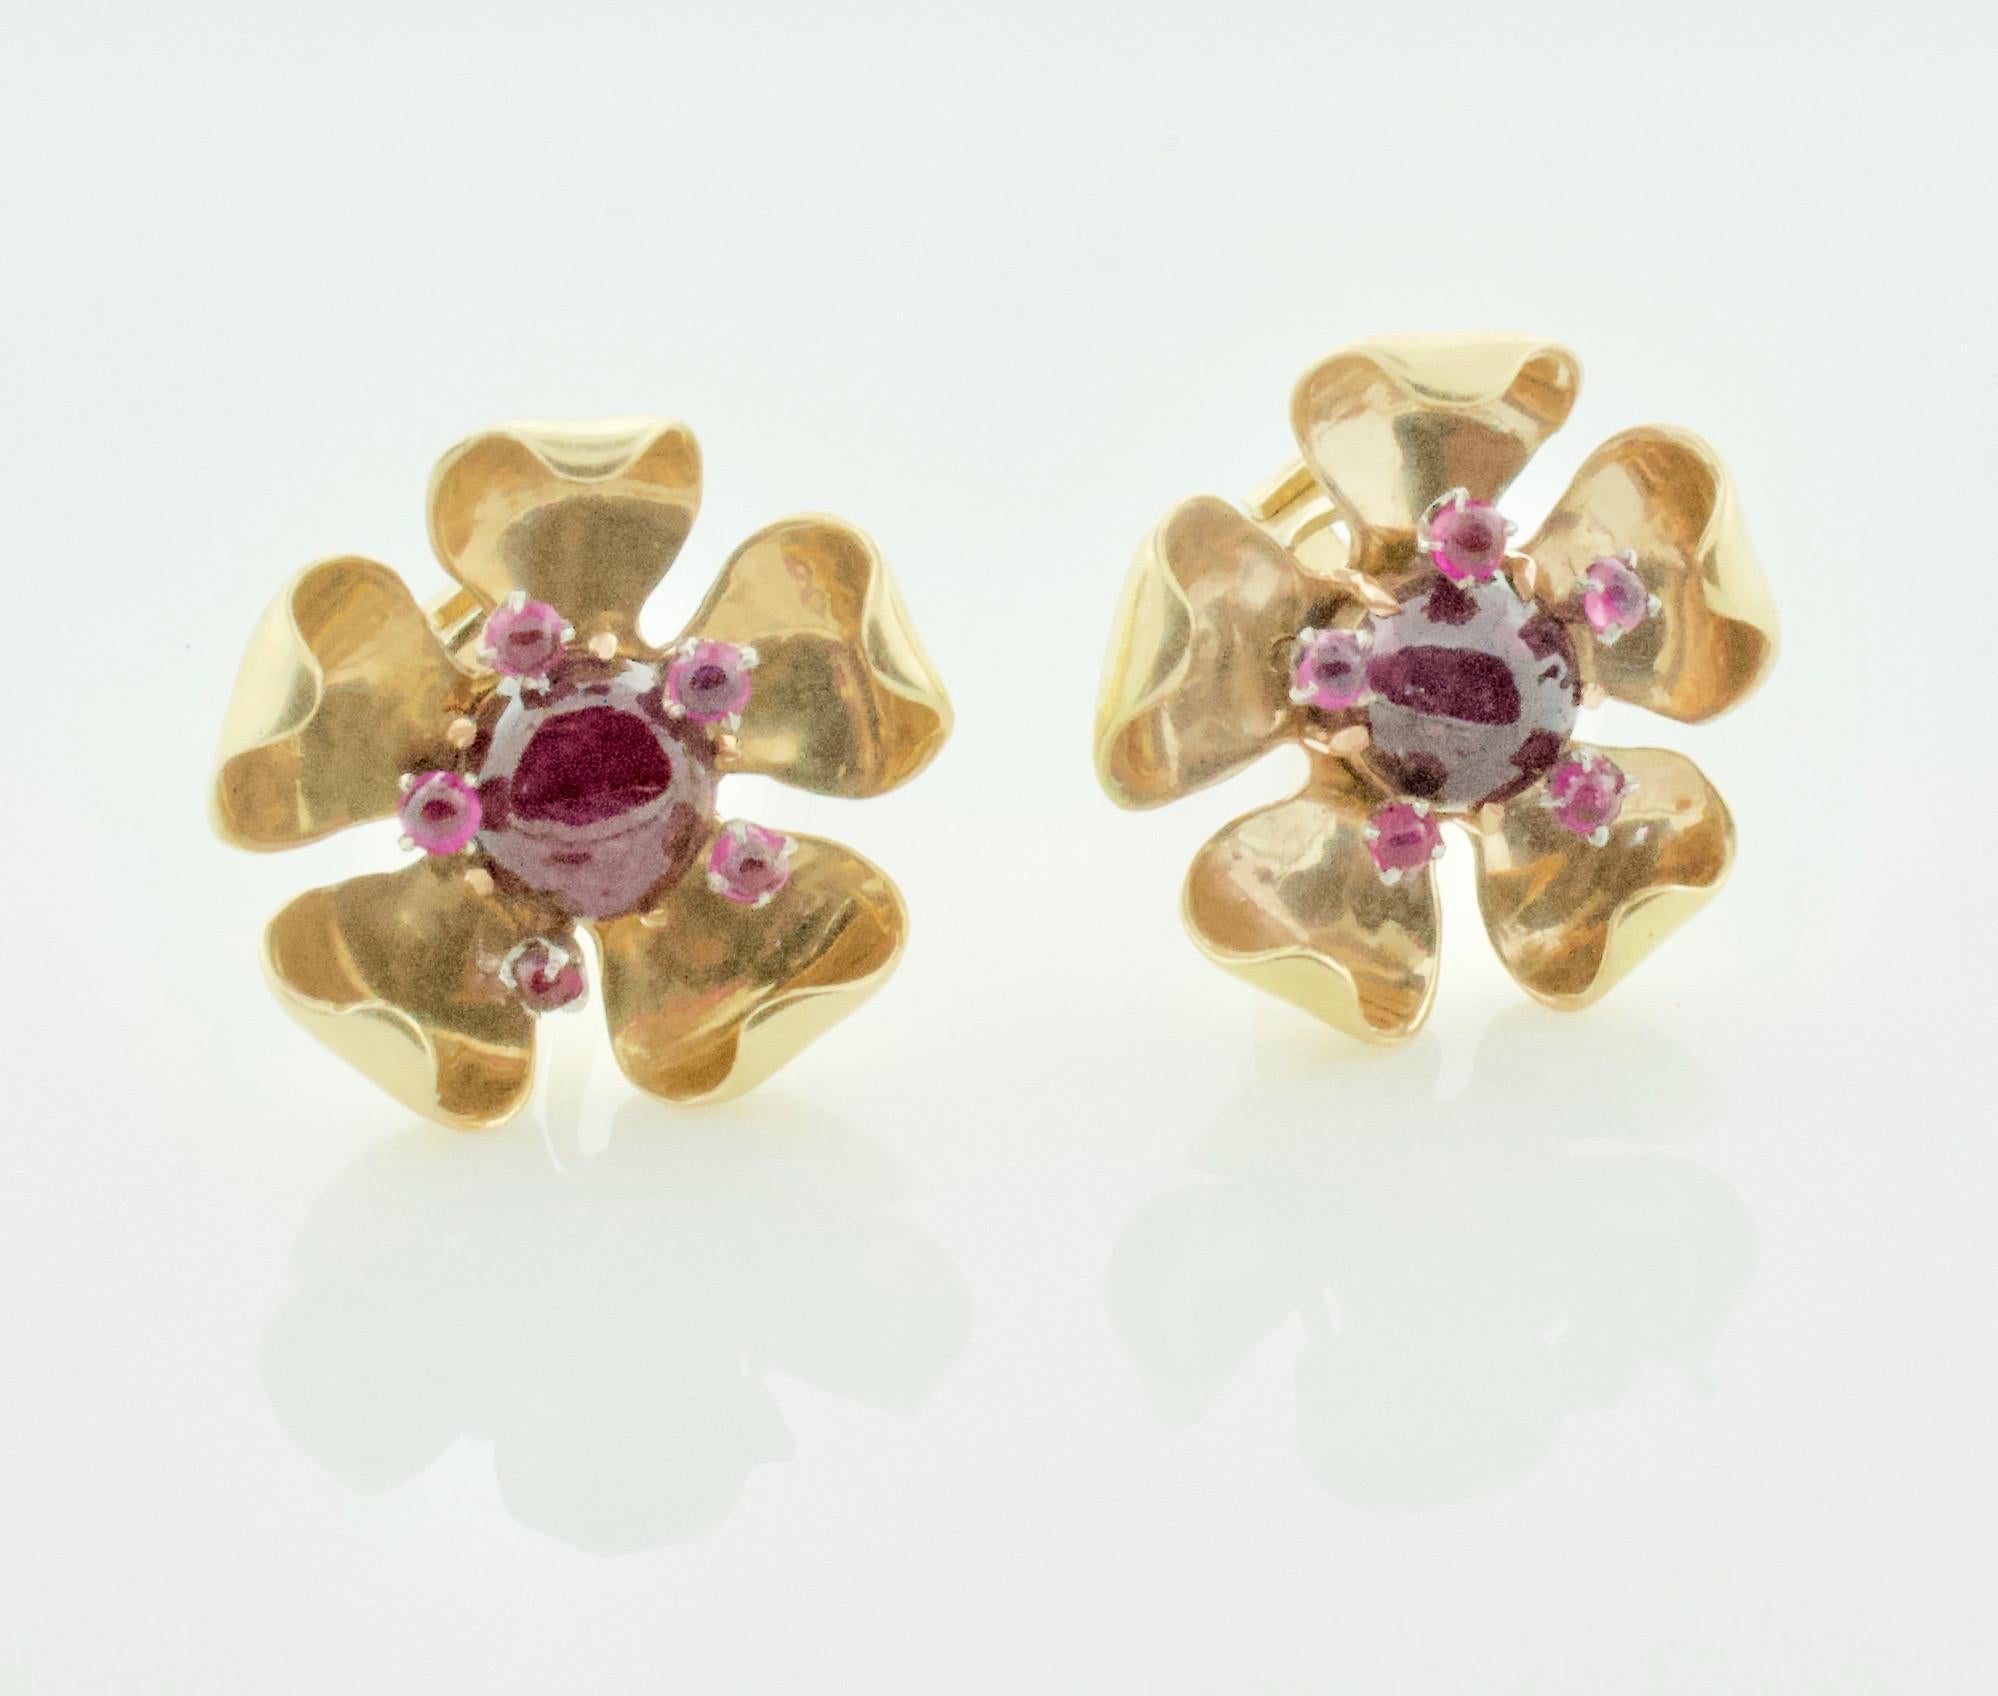 Circa 1940's Ruby and Diamond Floral Earrings in Yellow Gold.  
Eleven Cabochon Rubies Weighing 2.00 Carats Approximately
Very Stylish and Wearable 
Clip On.  Posts can be added by us or a qualified jeweler